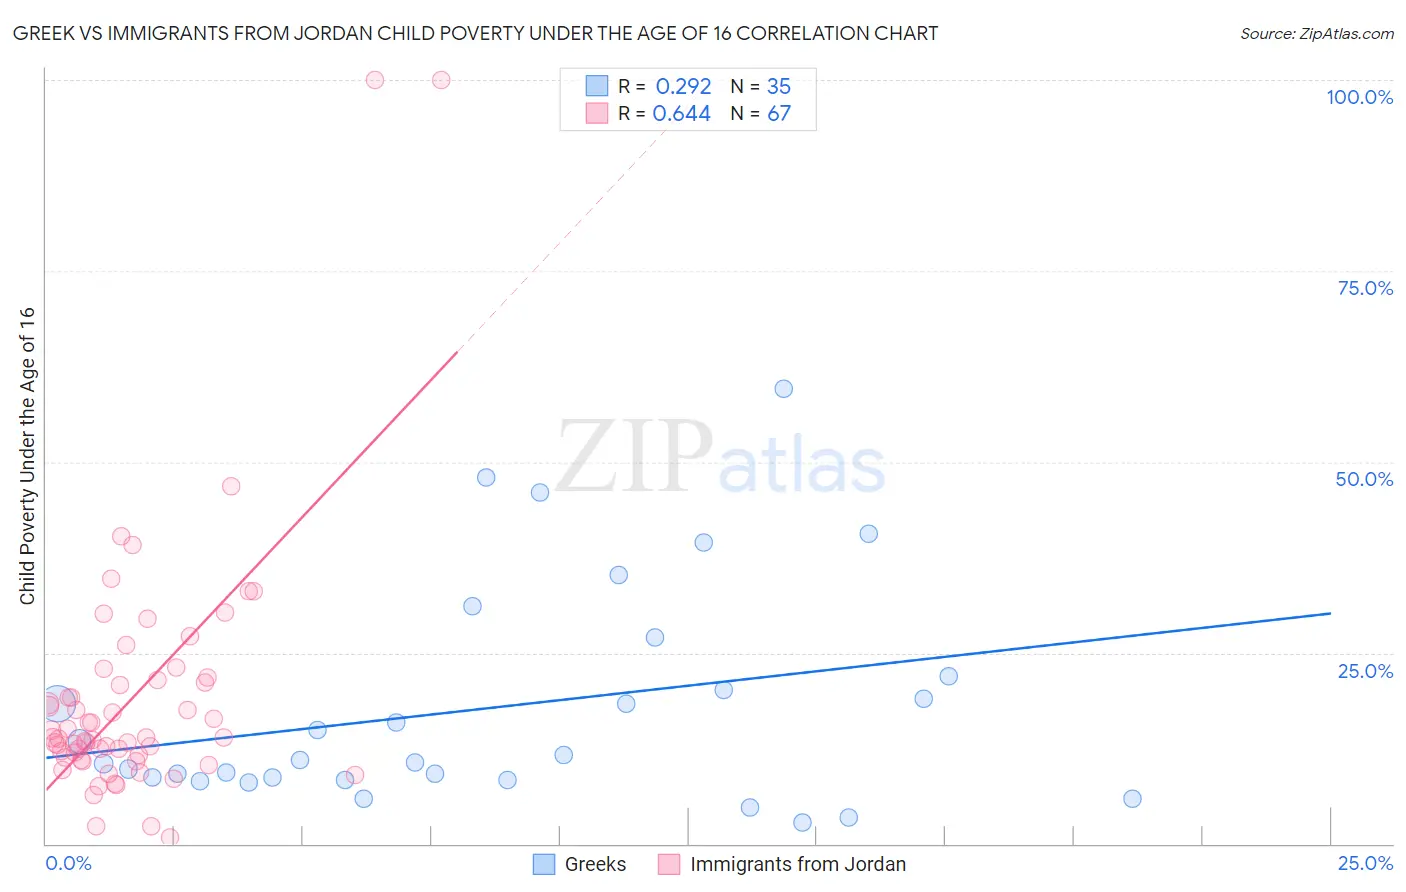 Greek vs Immigrants from Jordan Child Poverty Under the Age of 16